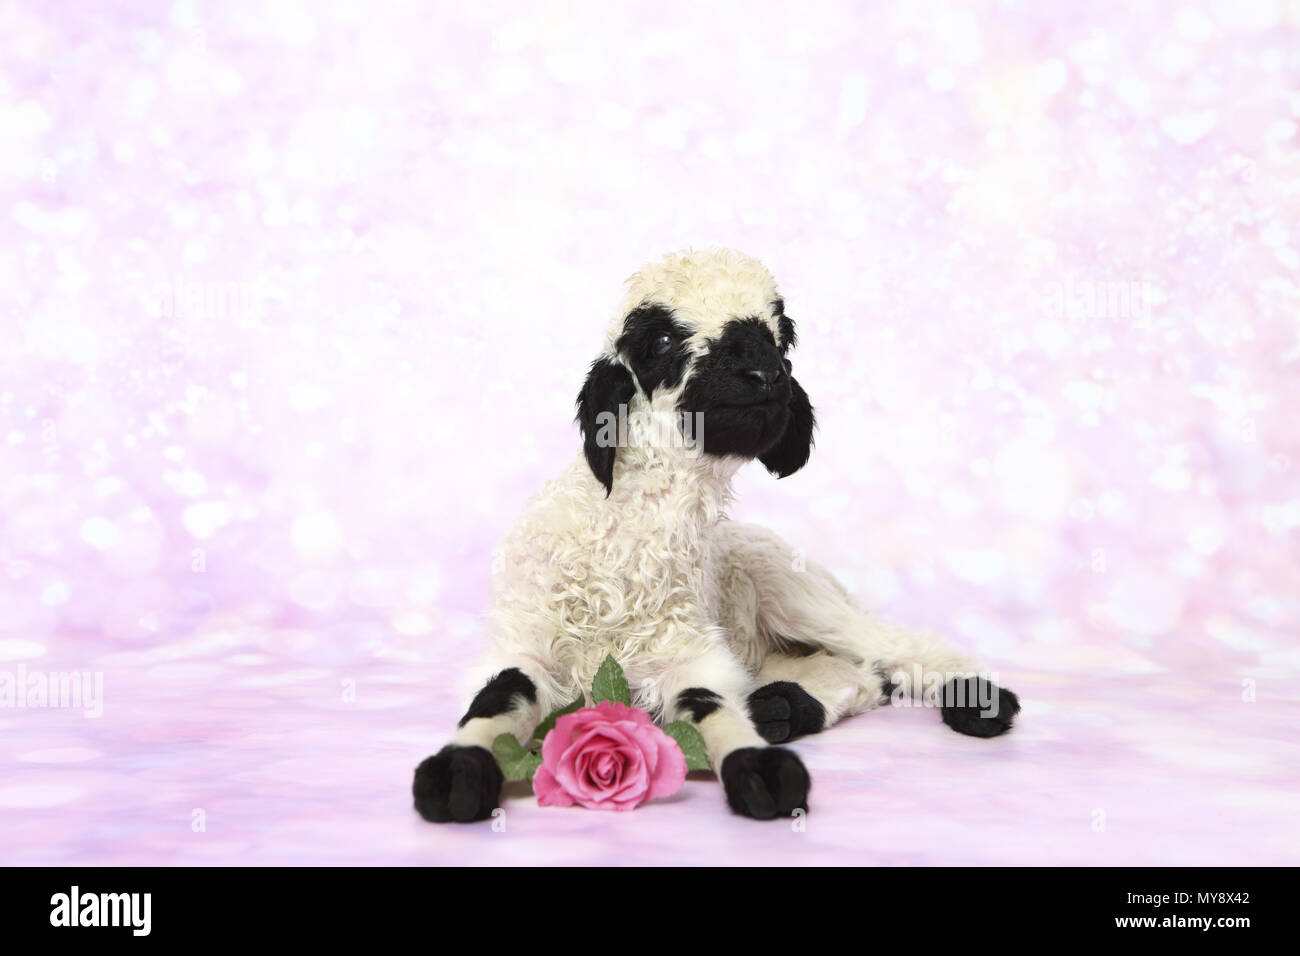 Valais Blacknose Sheep. Lamb (6 days old) lying next to a pink rose. Studio picture against a pink background. Germany Stock Photo